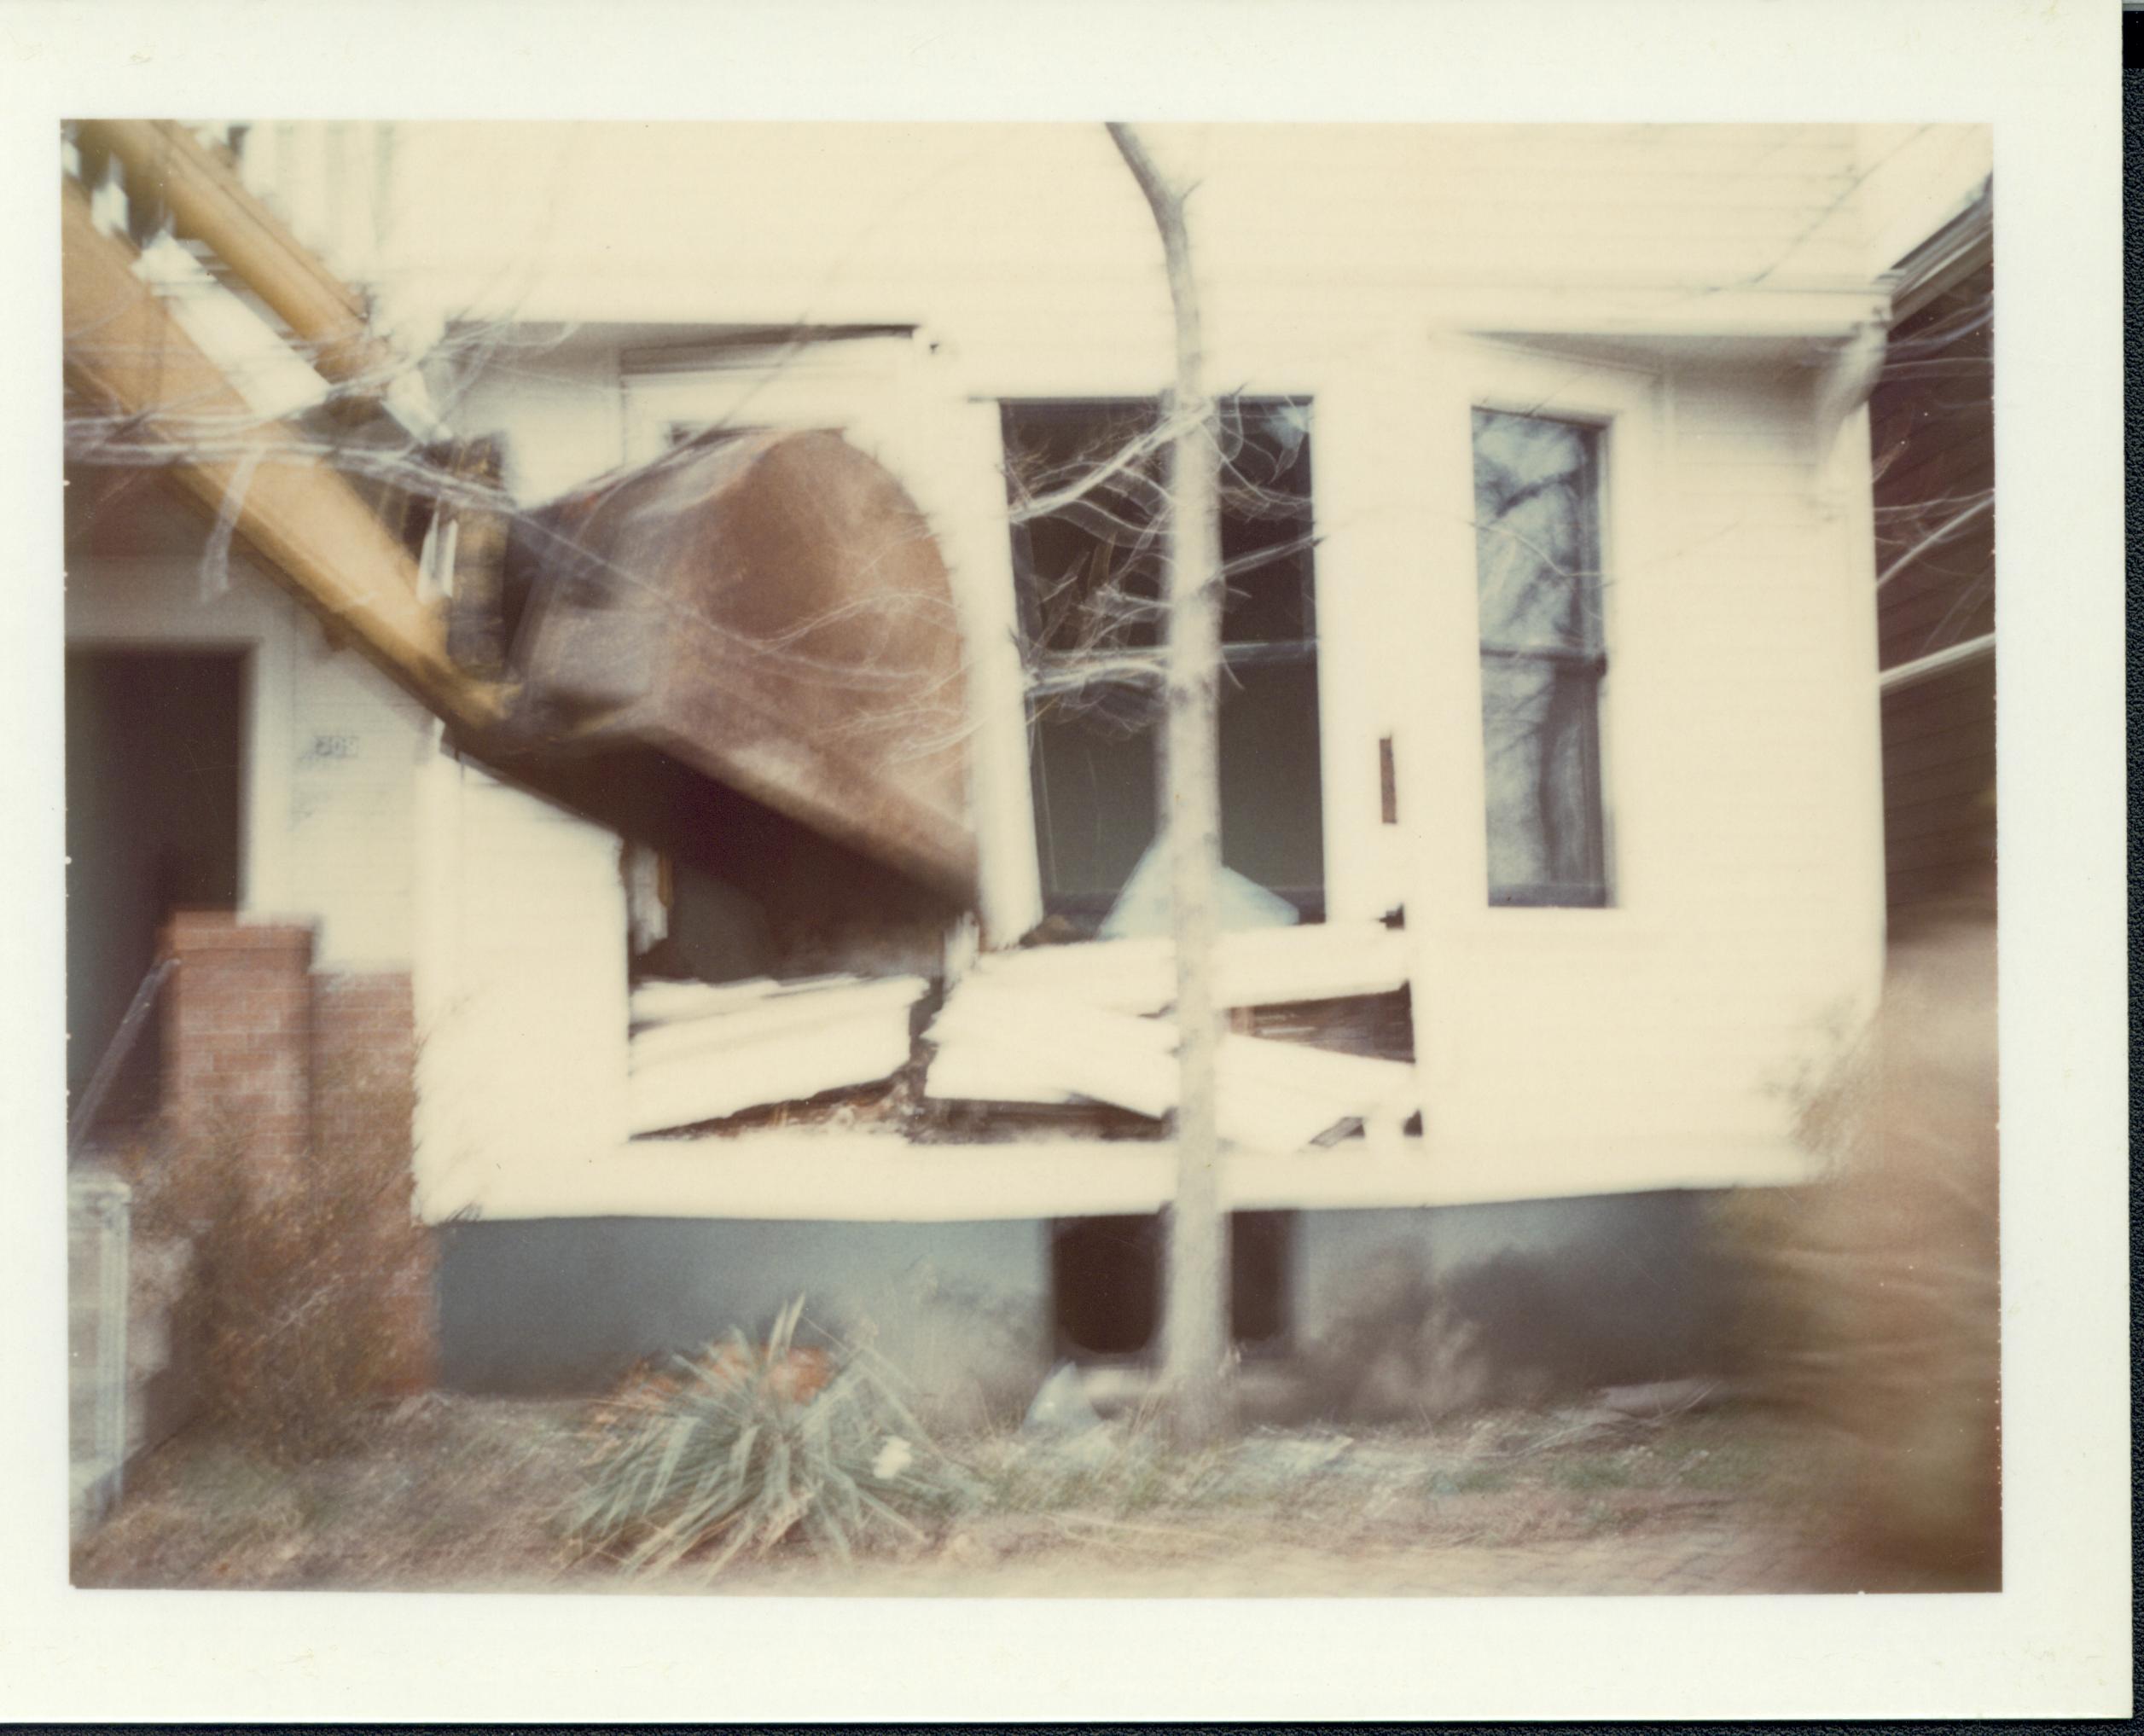 Duplex apartment owned by William Sheehan, Block 7, Lot 8, along Jackson Street, in the process of being razed.  Area is now Visitor Center. Blurry, looking North from Jackson Street Sheeham, Visitor Center, razing